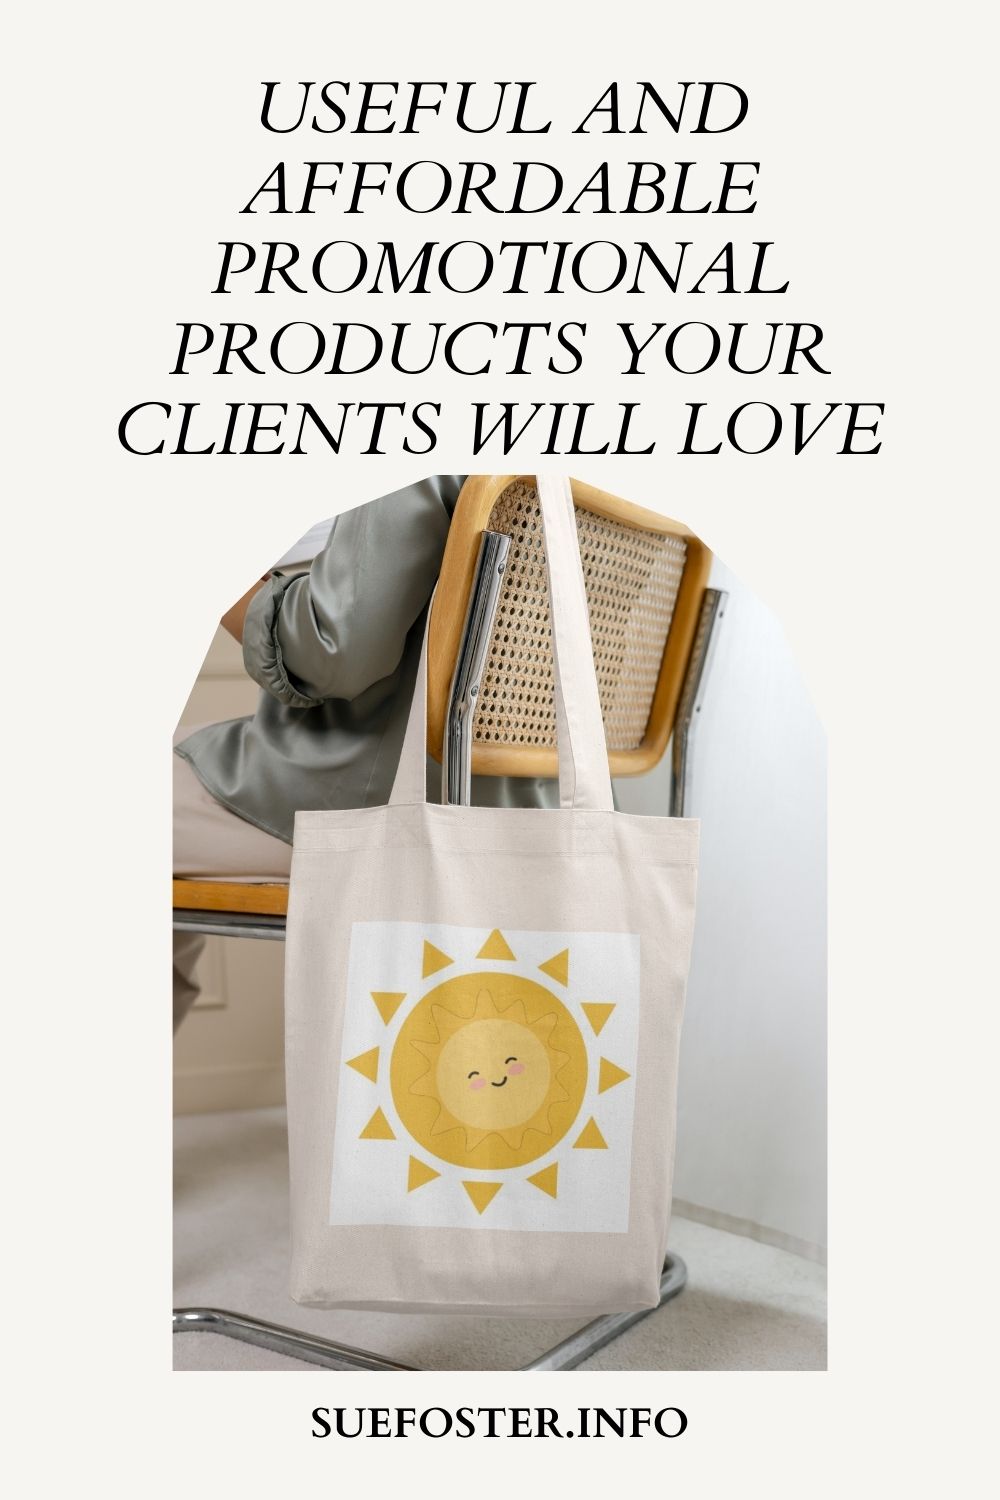 Affordable, useful promotional products that your clients will love. From reusable water bottles to tote bags and USB drives, make your brand stand out.